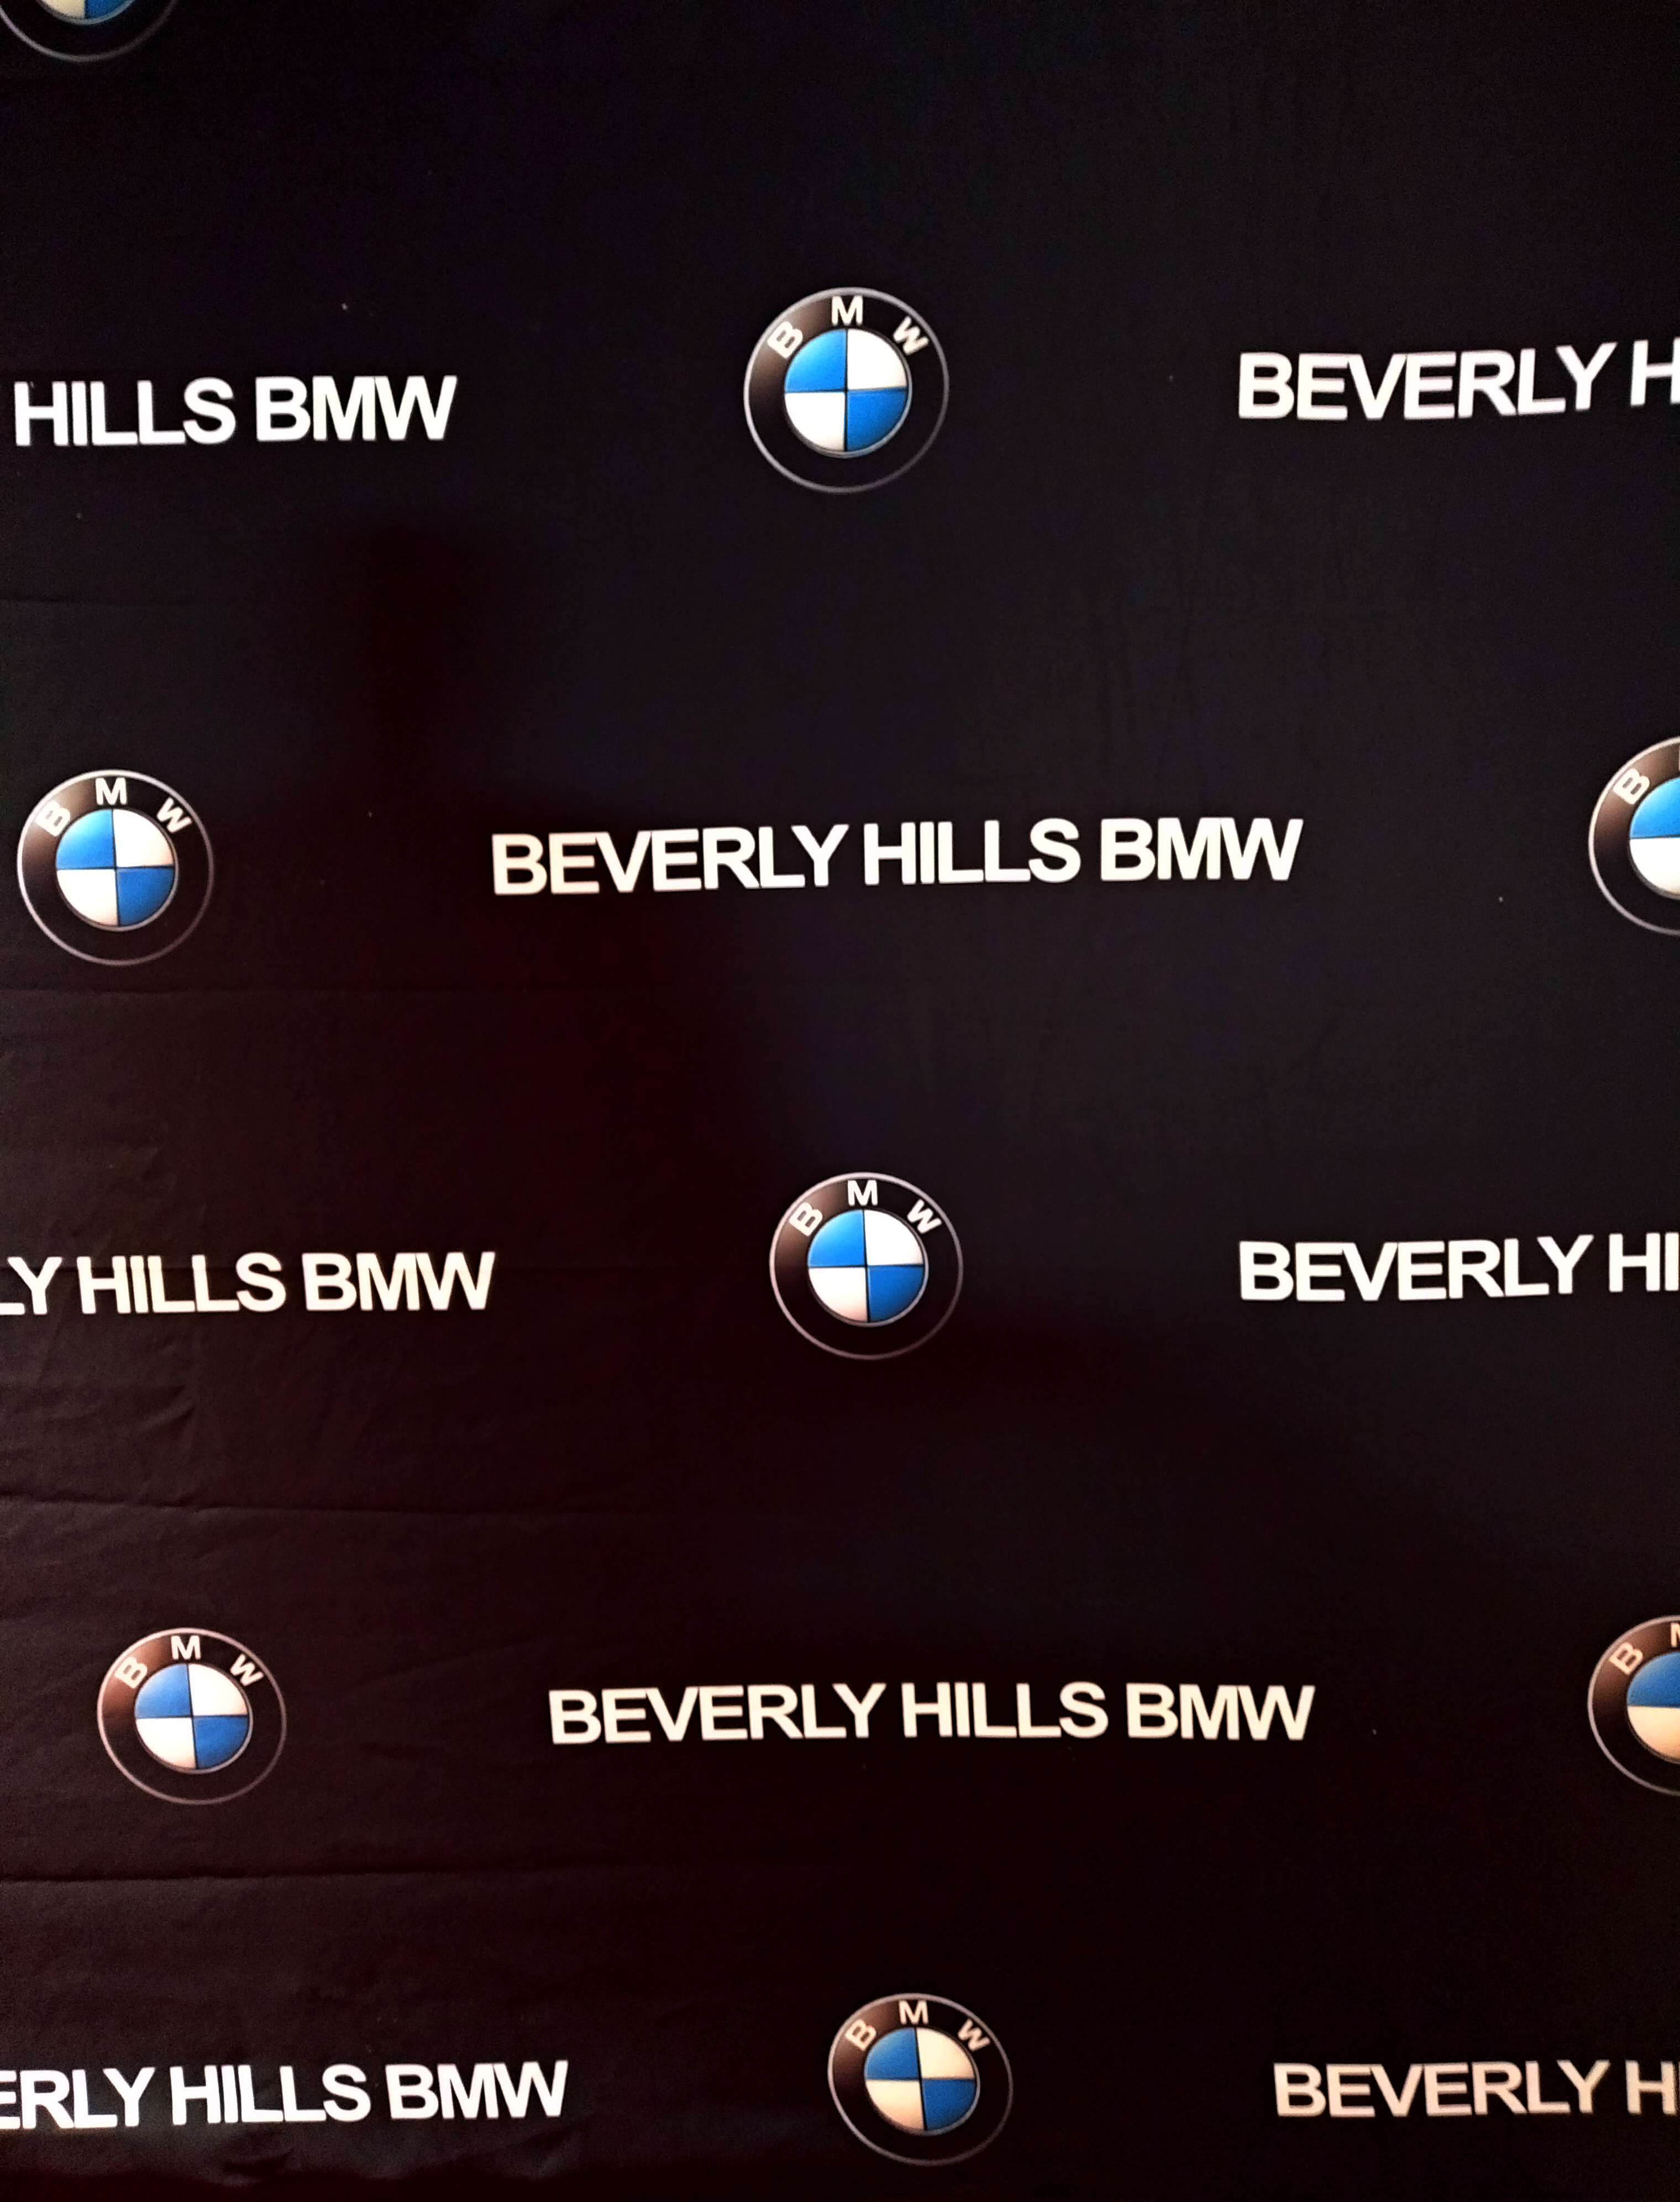 BMW Of Beverly Hills Celebrates The 2019 BMW 8 Series Cabriolet